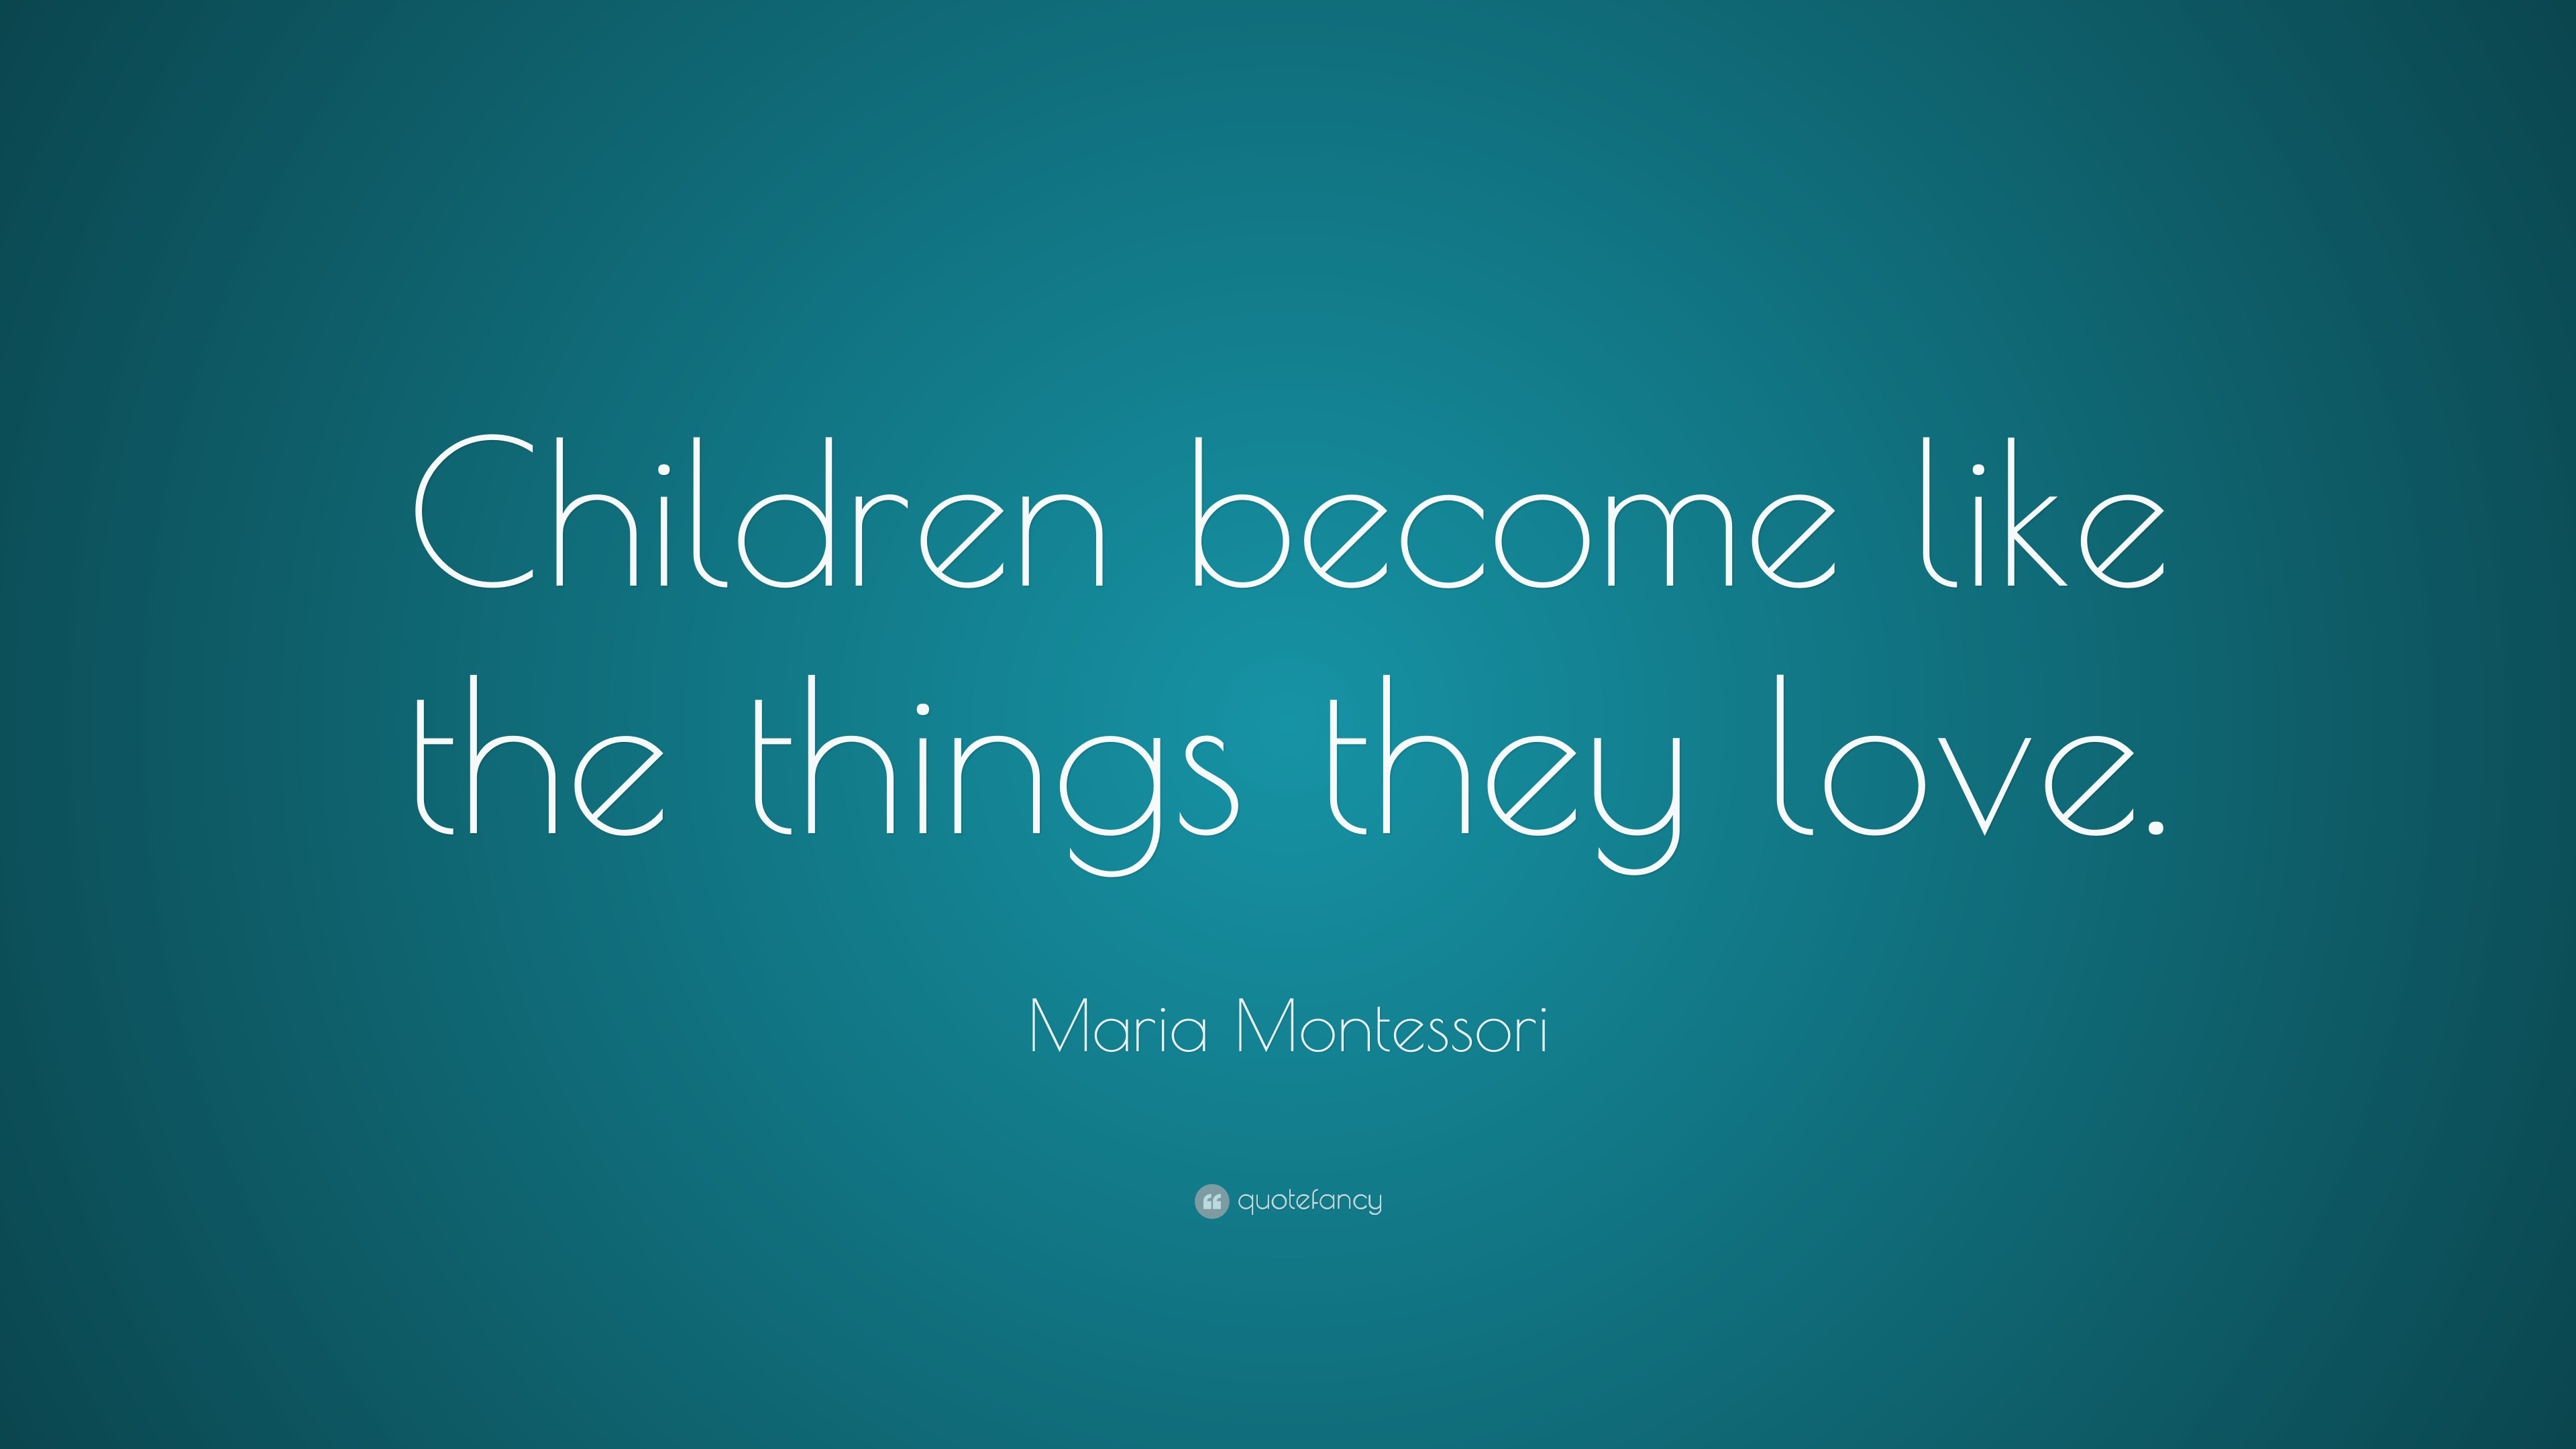 Maria Montessori Quote: “Children become like the things they love.”